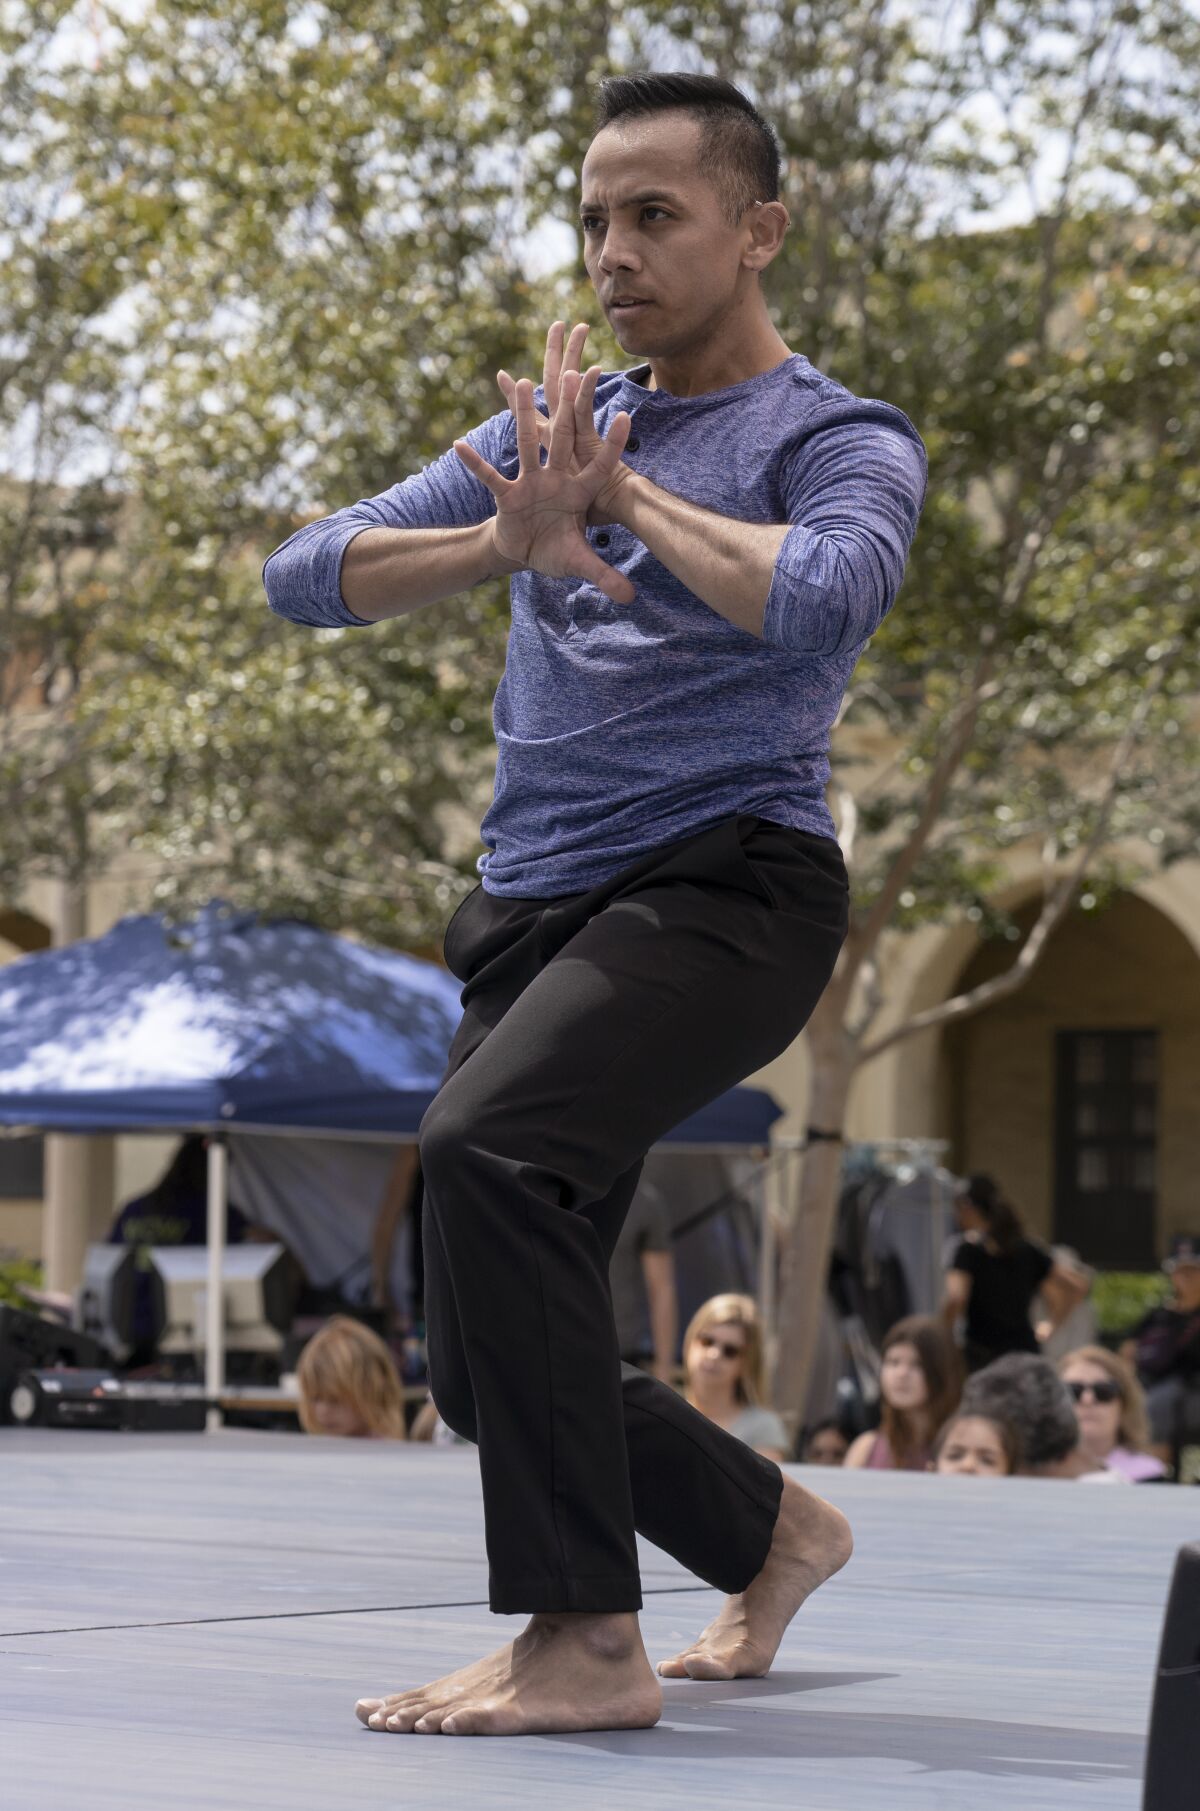 Justin Viernes, a Malashock company dancer since 2011, performs at the Without Walls Festival in April.